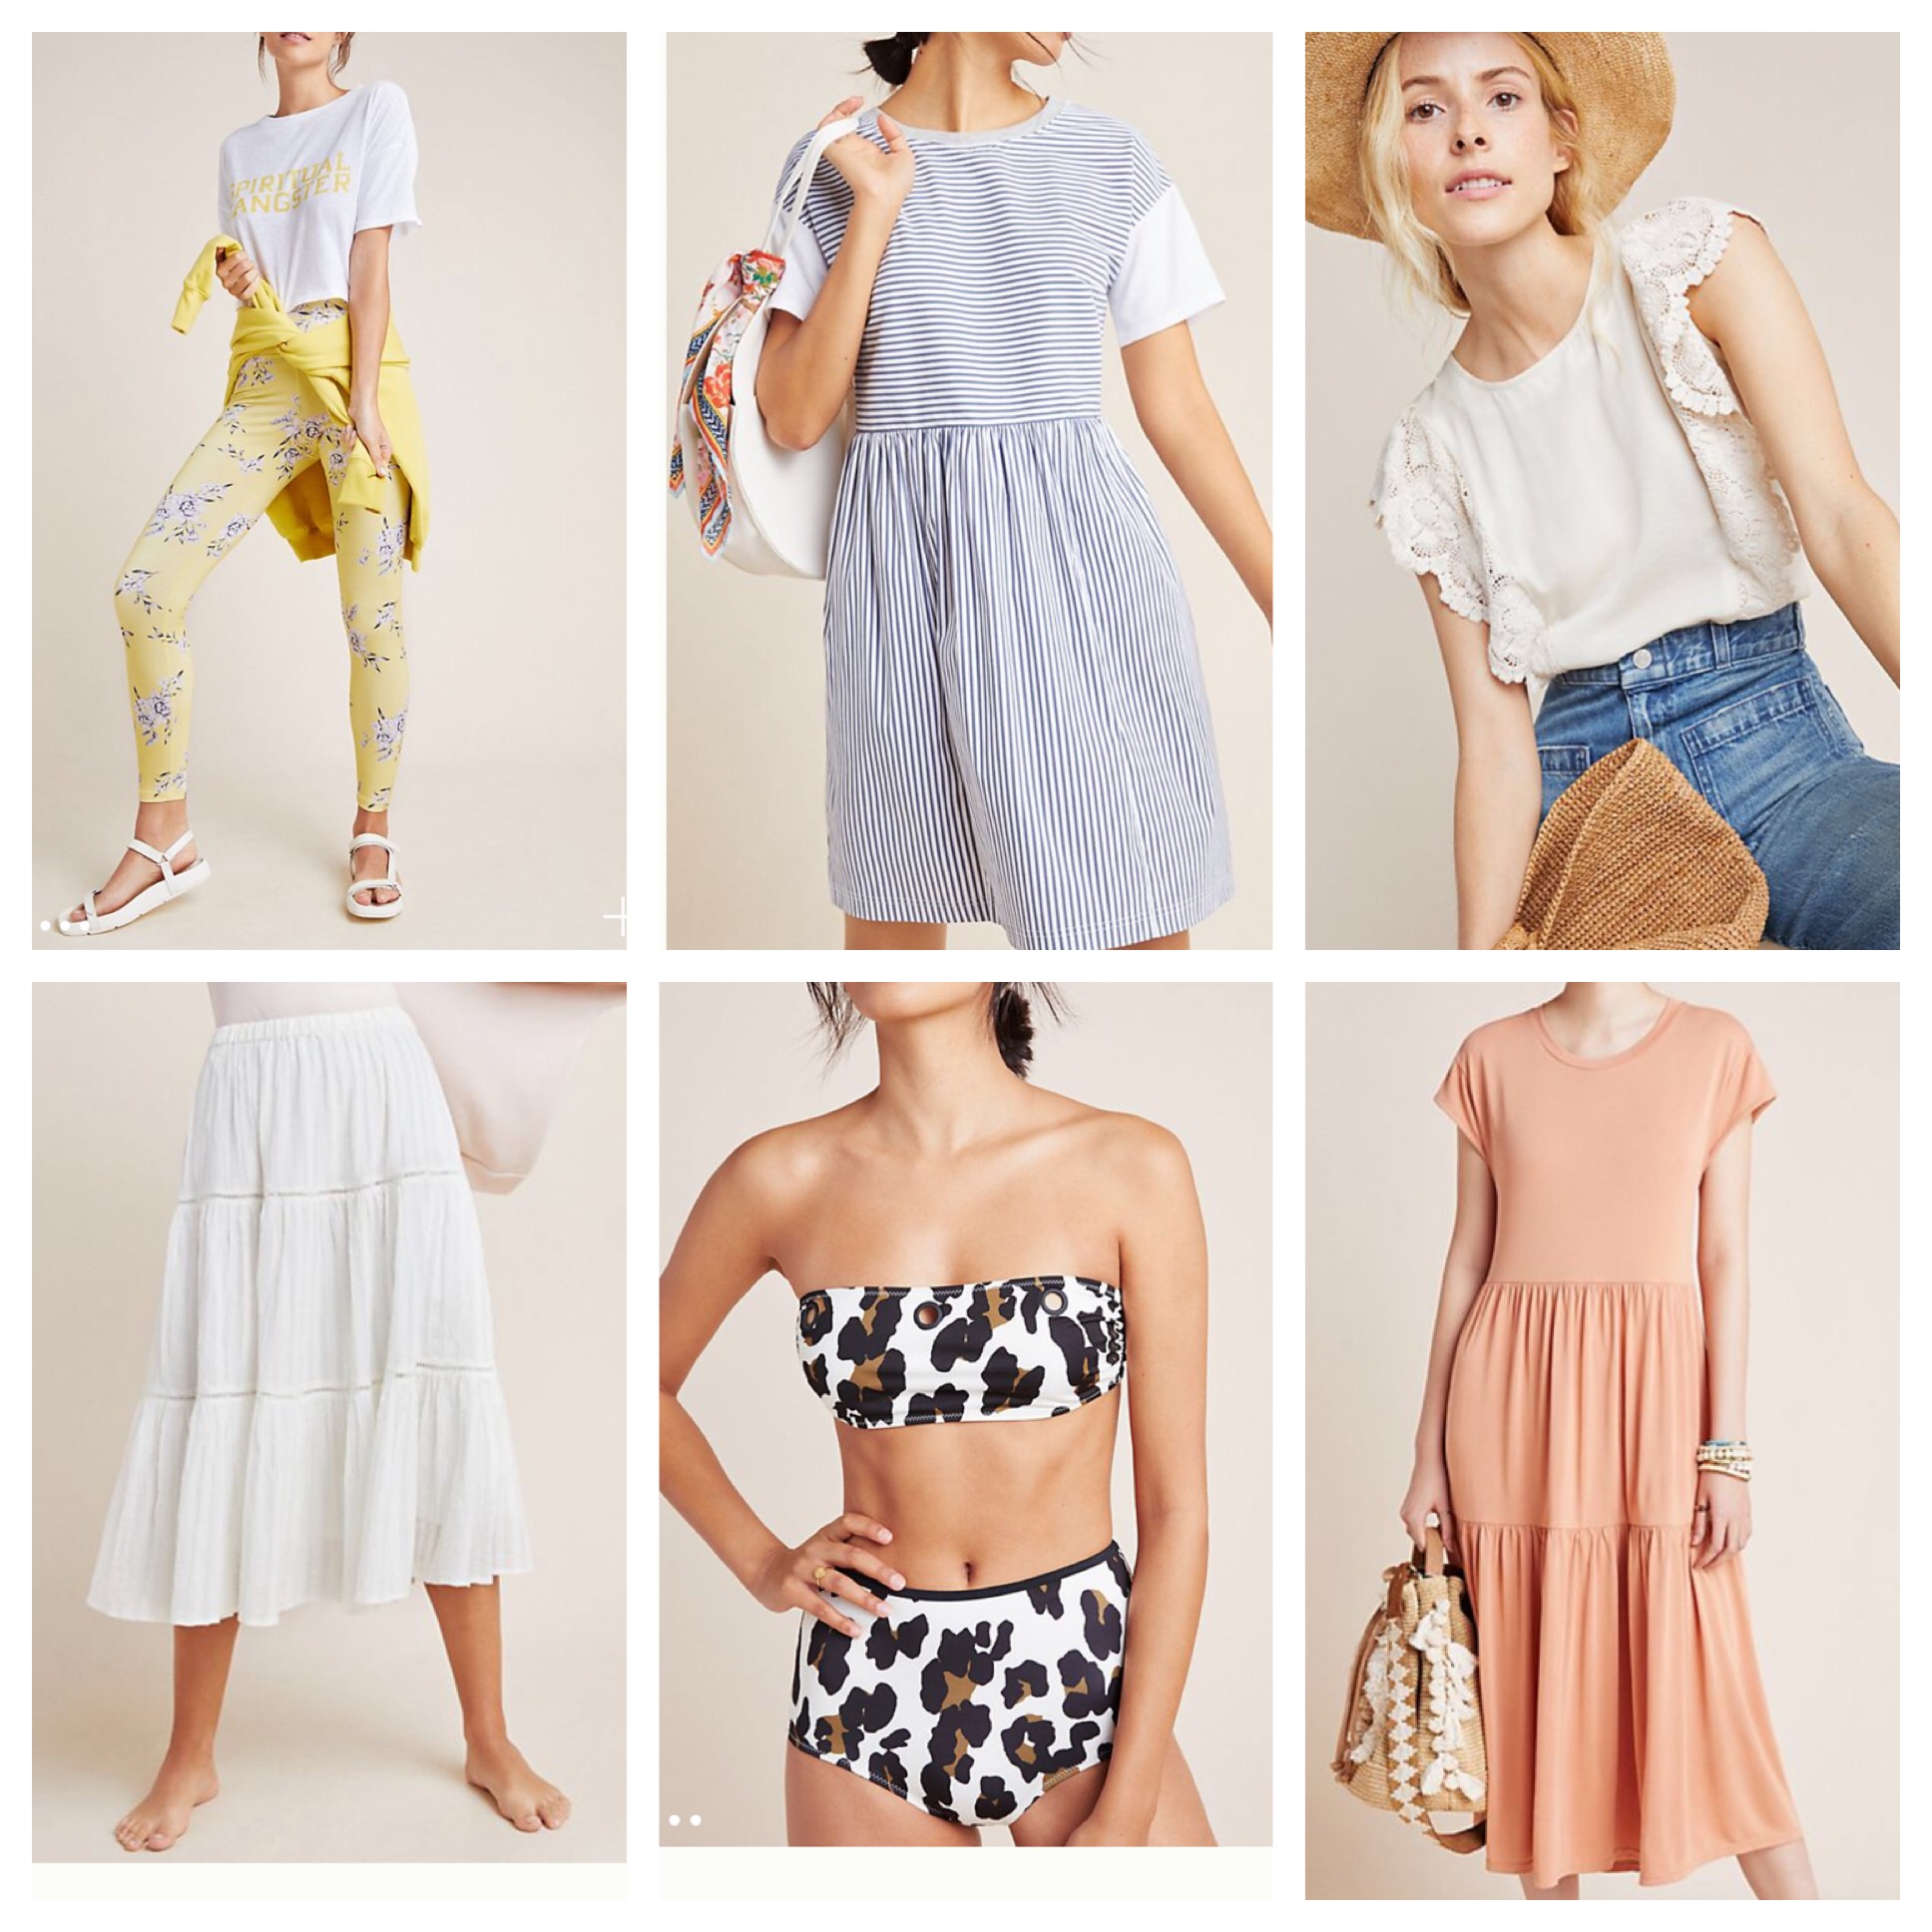 LTK Day Shopping Guide: The Best Sales and Top Picks featured by top US fashion blog, Outfits & Outings: best deals from Anthropologie